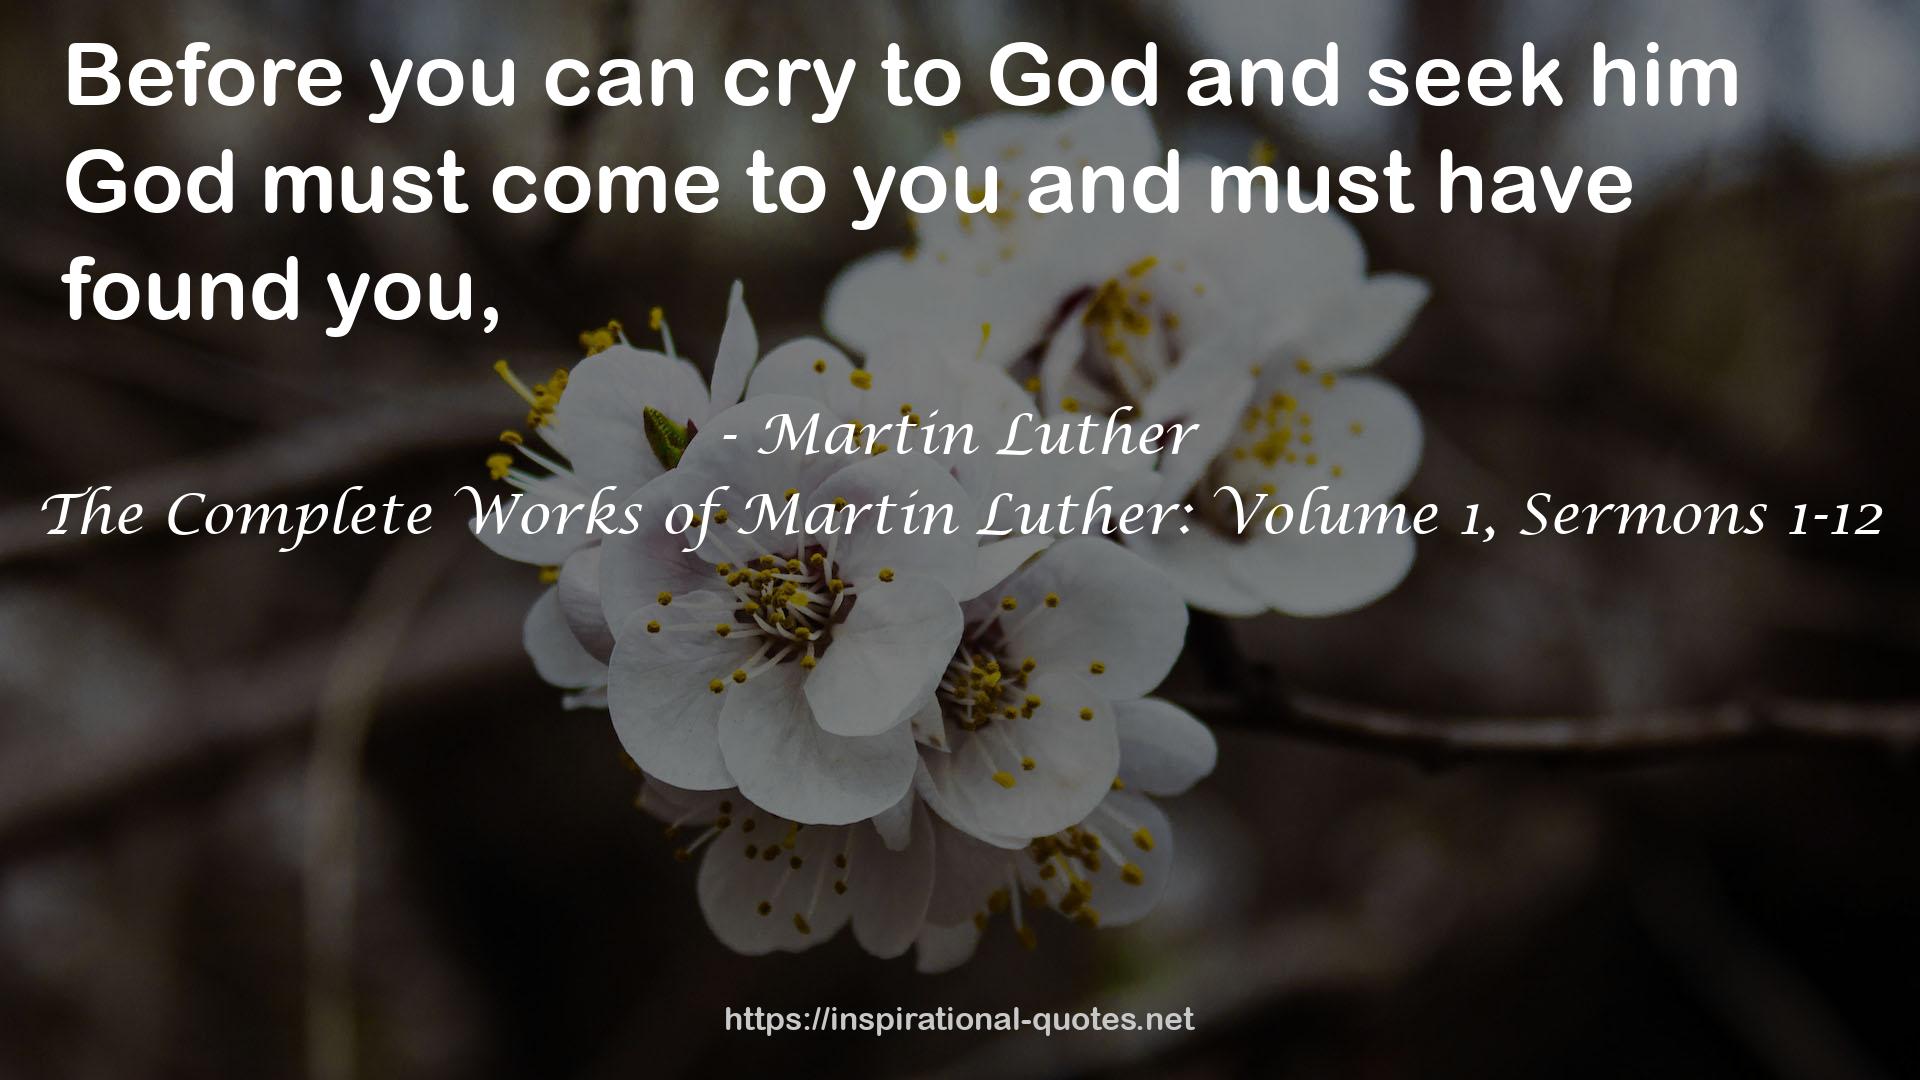 The Complete Works of Martin Luther: Volume 1, Sermons 1-12 QUOTES